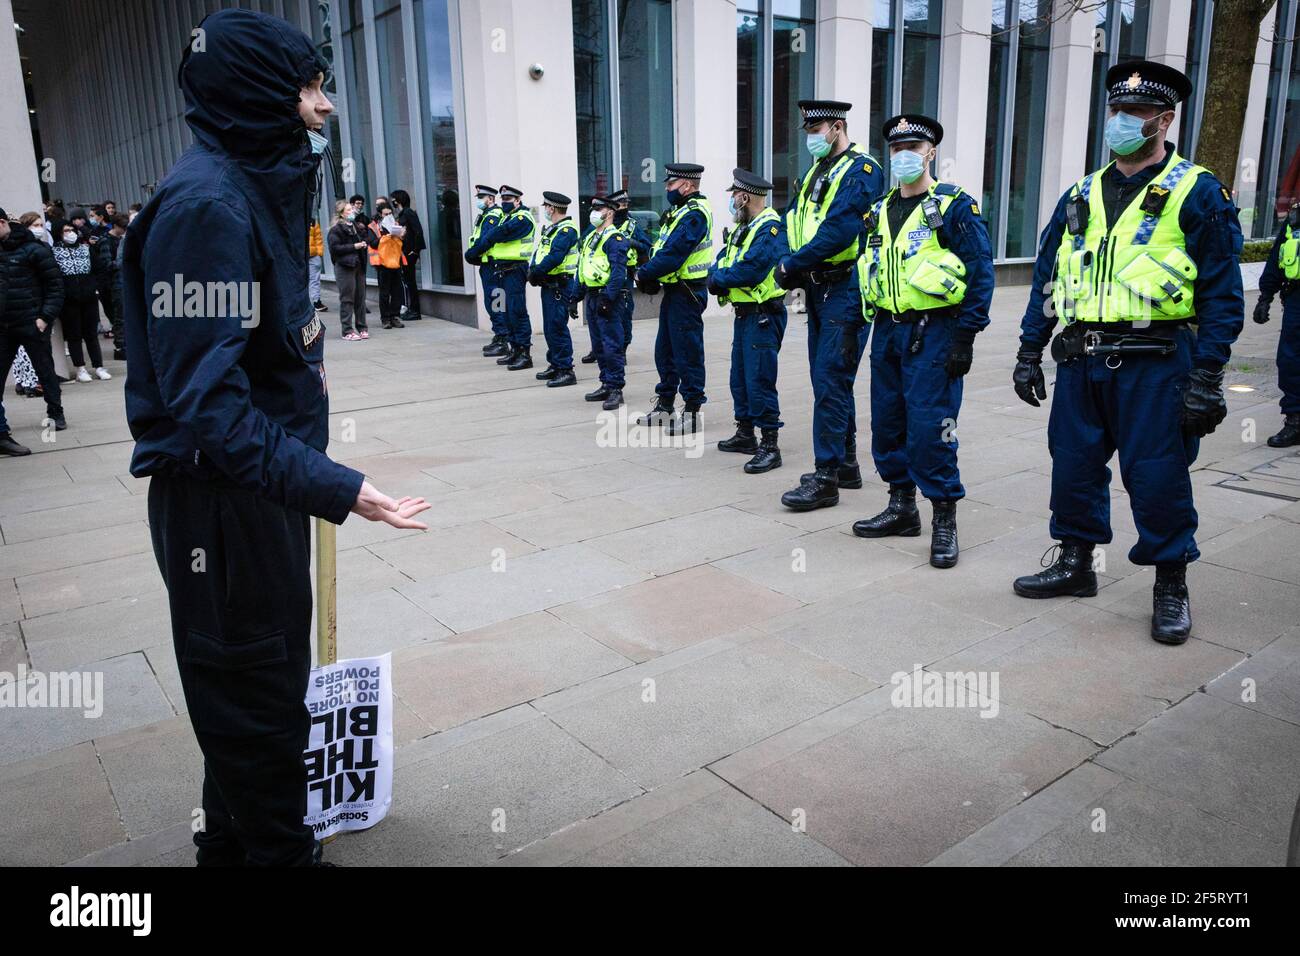 A protester confronts the police during the demonstration. People come out to the streets to protest against the new policing bill in a 'Kill The Bill demonstration'. The new legislation will give the police more powers to control protests. (Photo by Andy Barton / SOPA Images/Sipa USA) Stock Photo